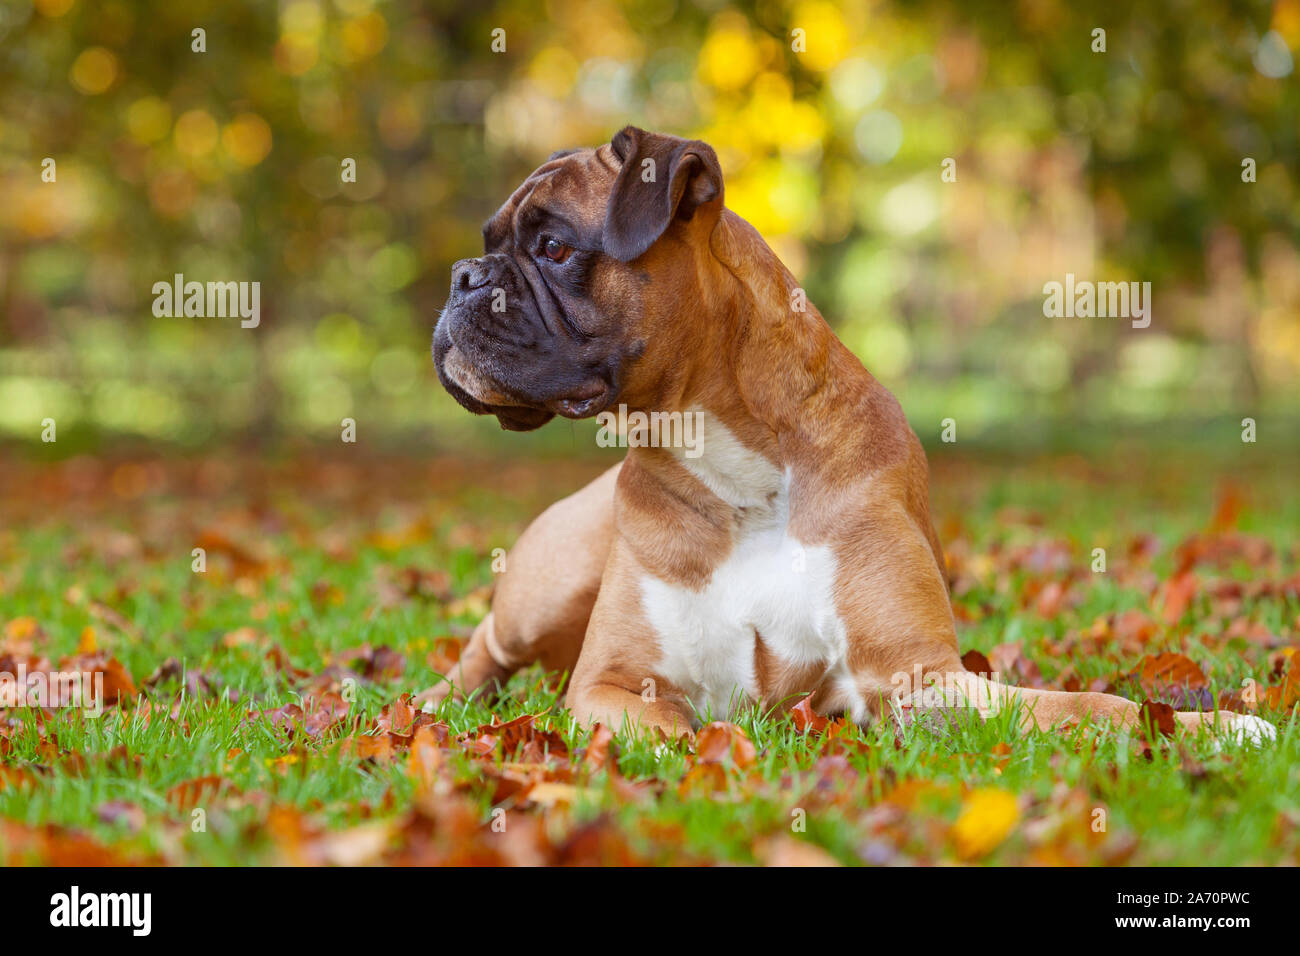 A female Boxer dog laying down outdoors among fallen leaves in autumn Stock Photo